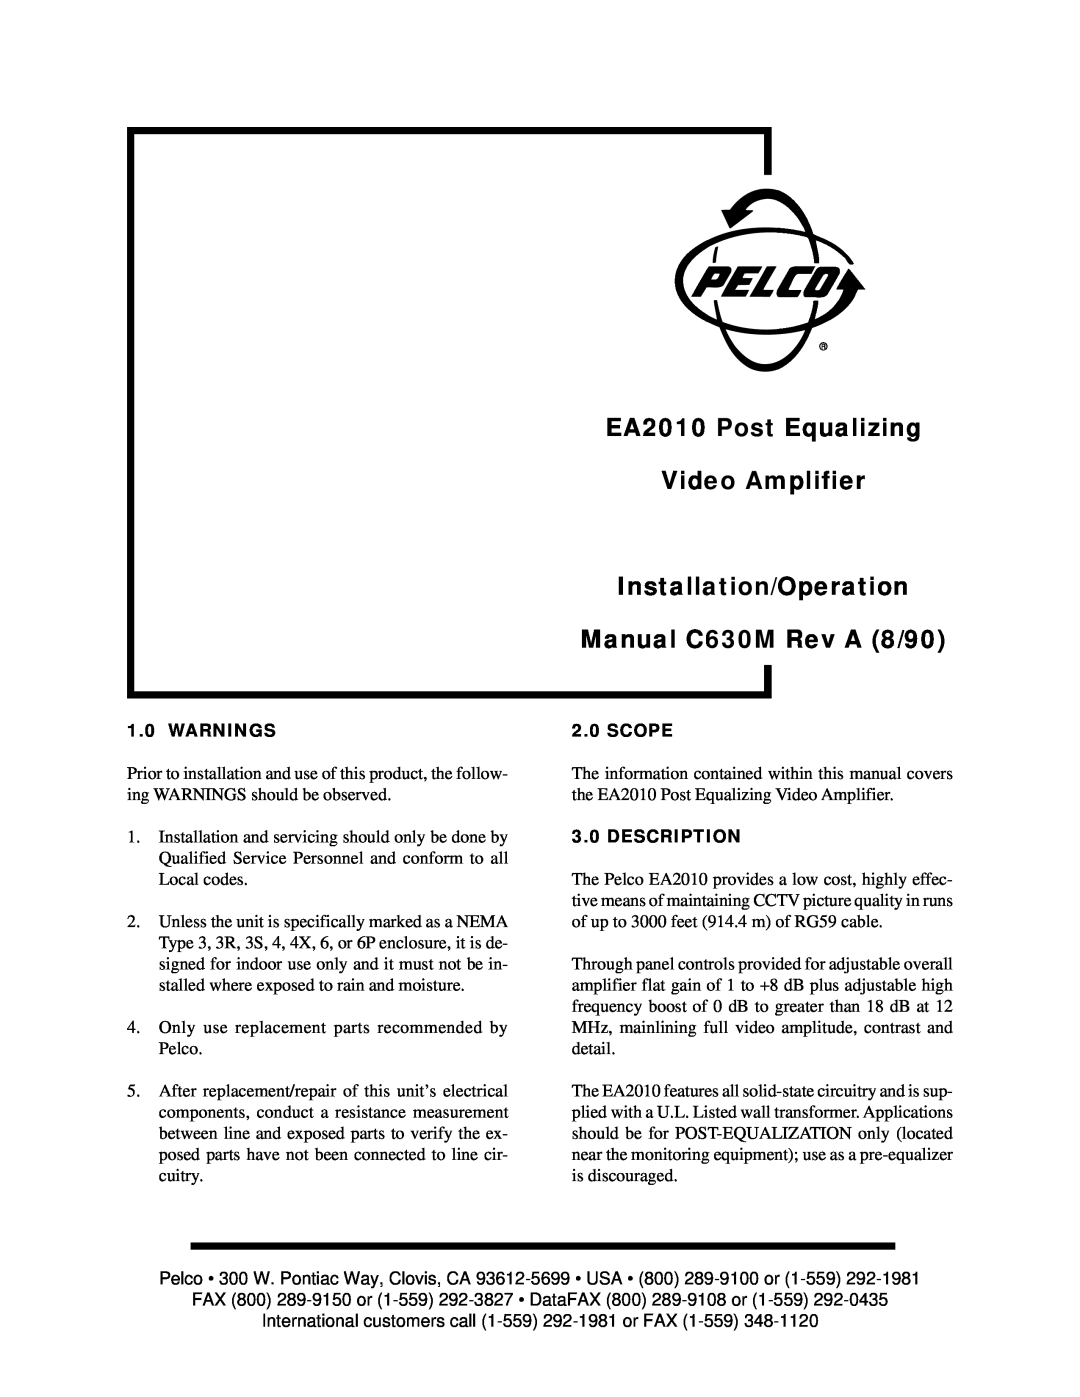 Pelco operation manual Warnings, Scope, Description, EA2010 Post Equalizing, Video Amplifier, Installation/Operation 